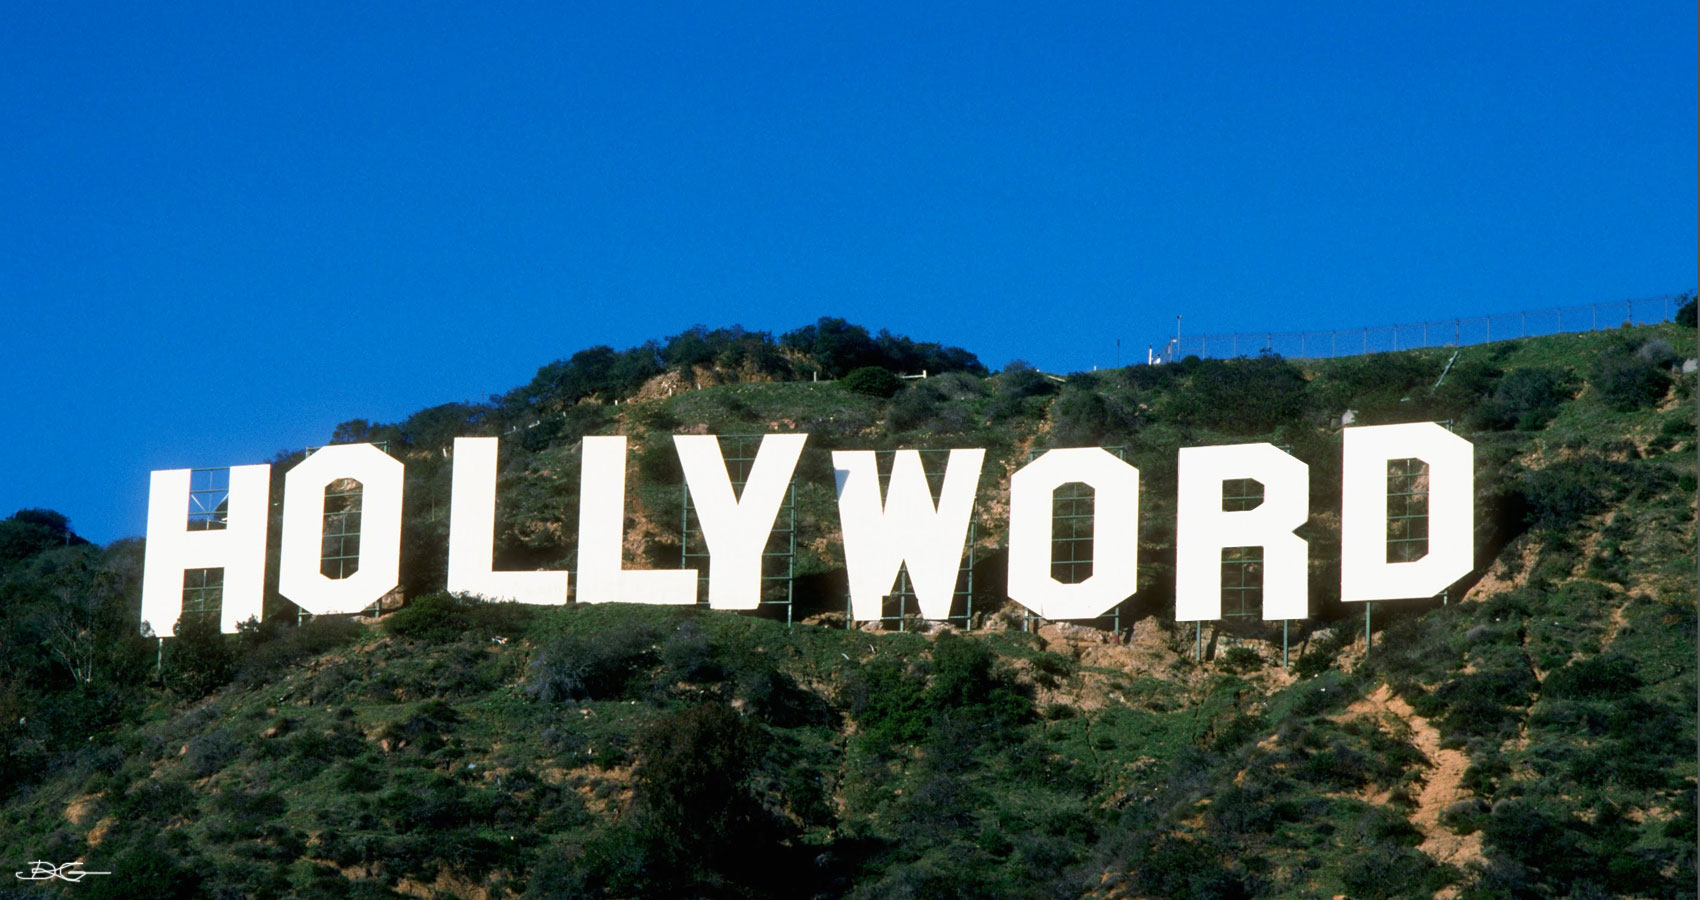 Hollyword written by Alan Mitnick at Spillwords.com